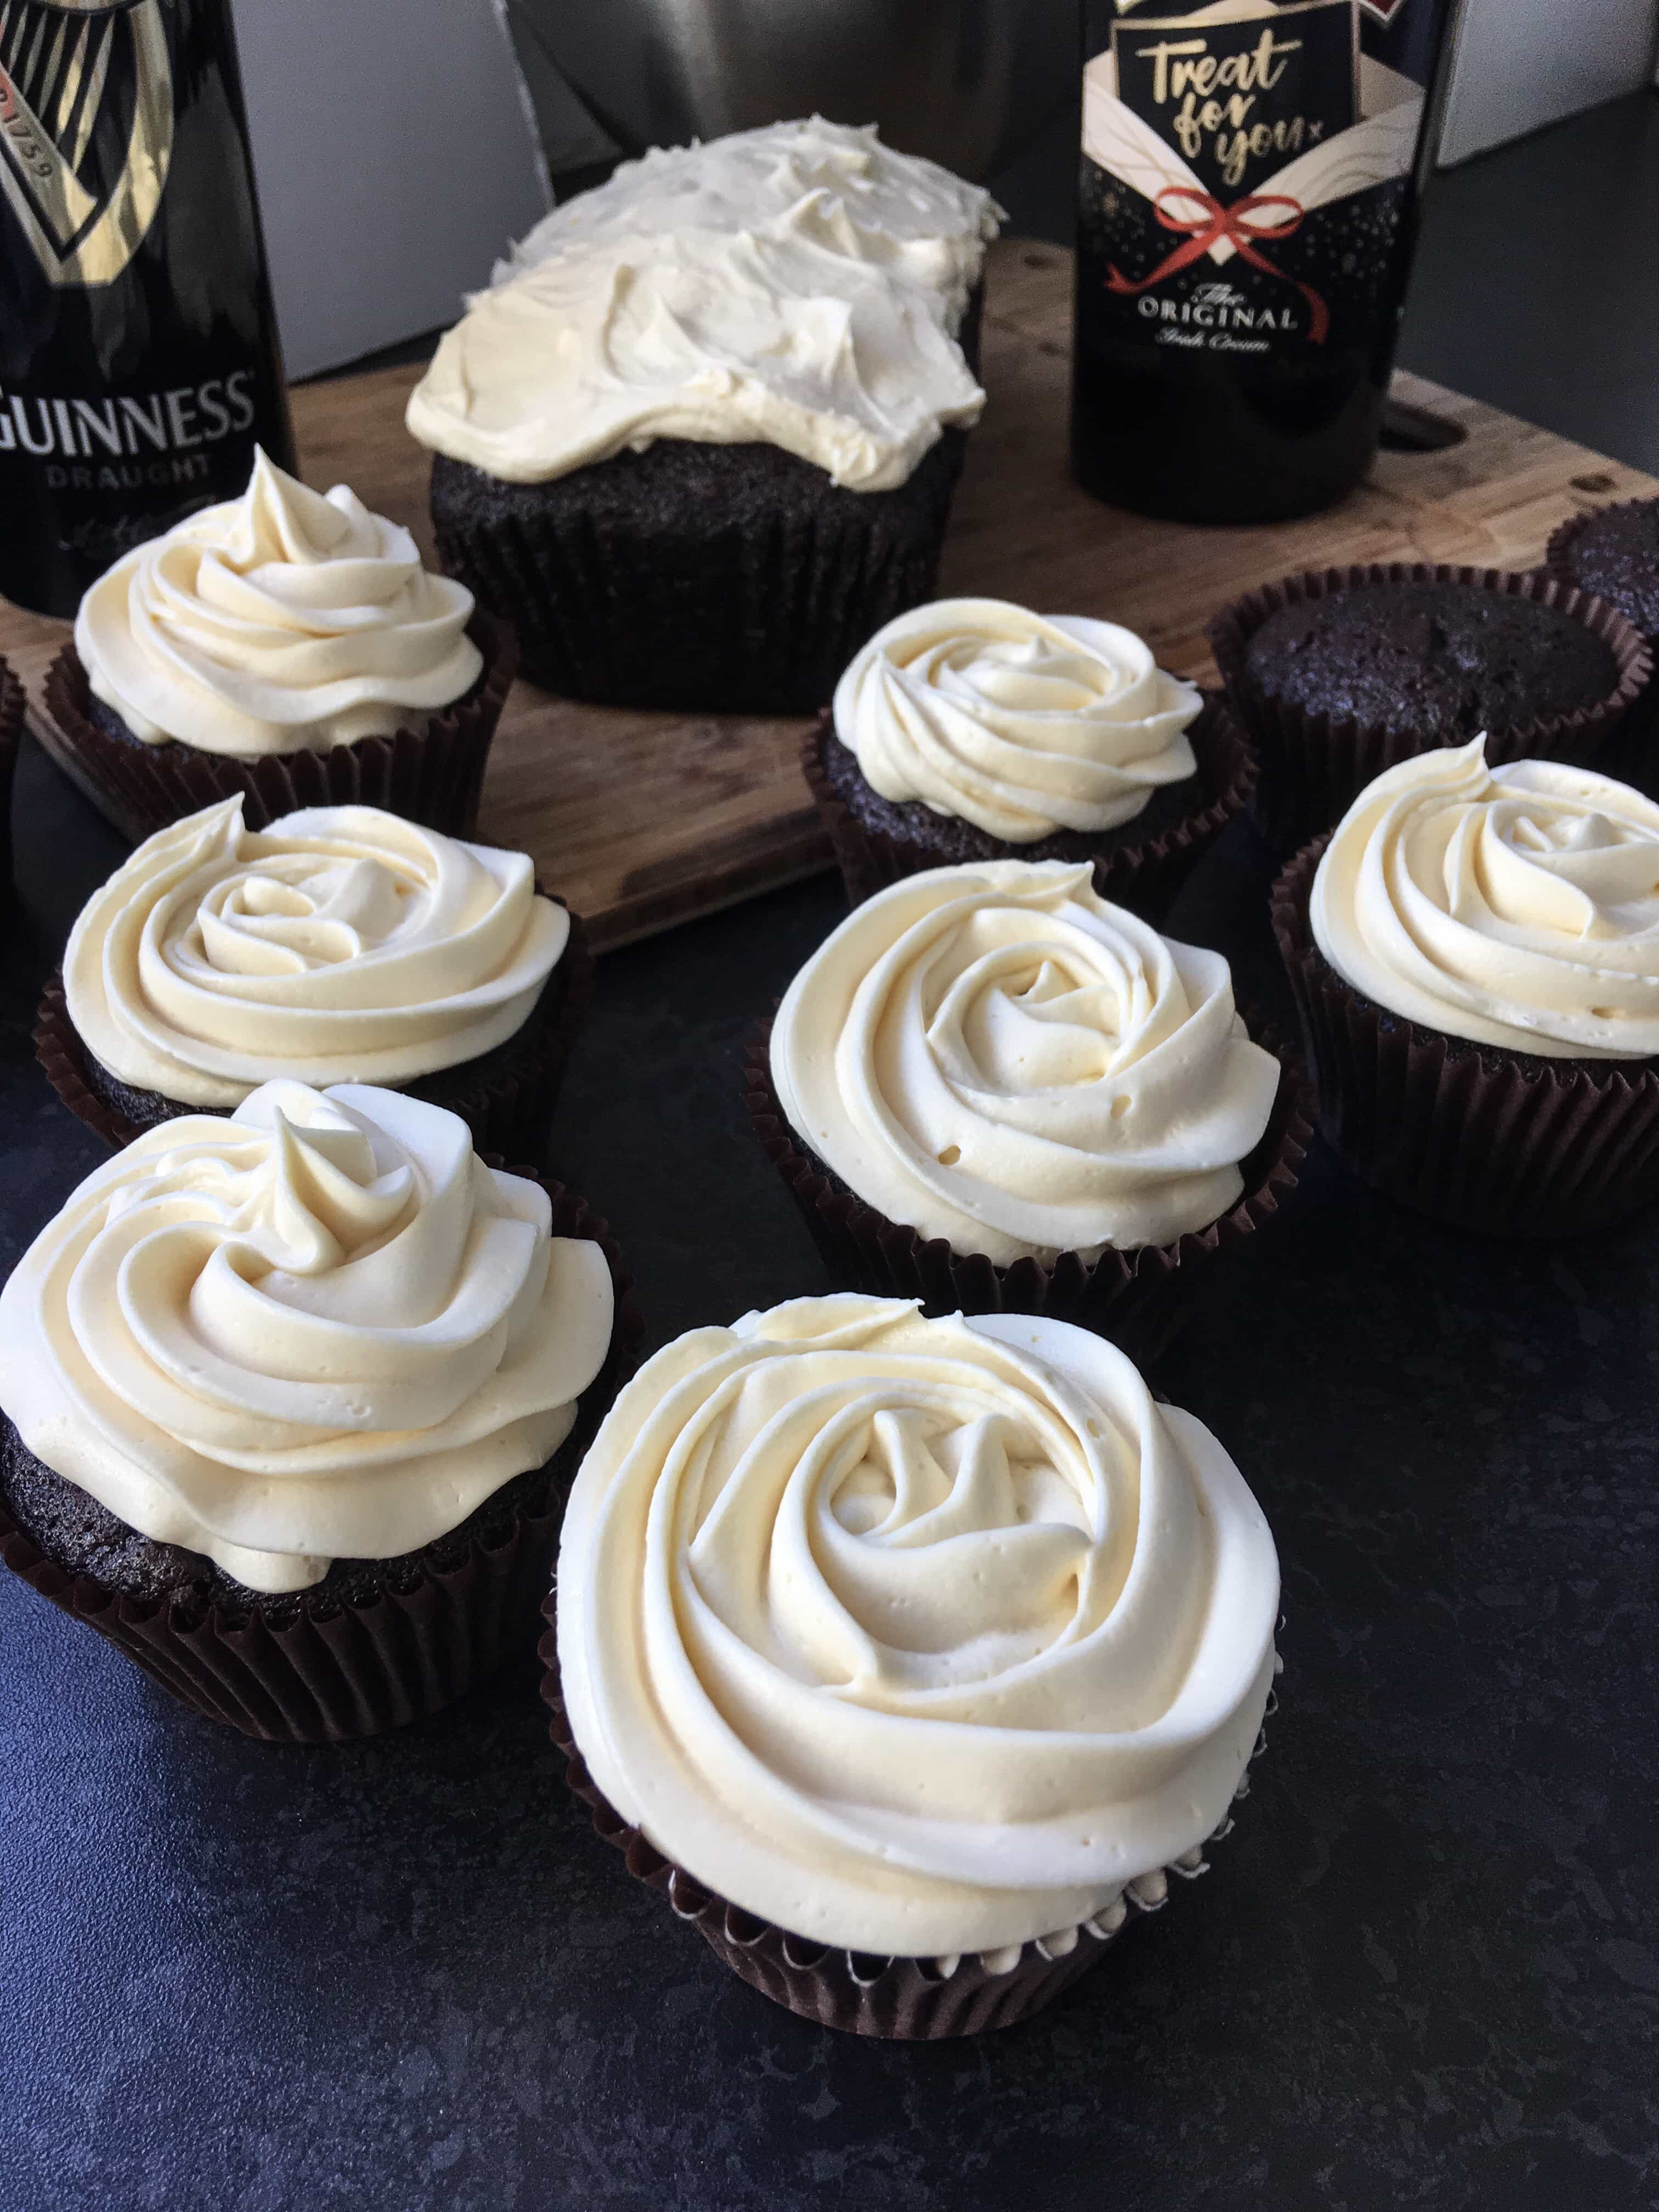 a row of chocolate cupcakes topped with a rose swirl of baileys frosting. A chocolate loaf cake topped with the frosting on a wooden board with a can of Guinness and a bottle of Baileys Irish cream